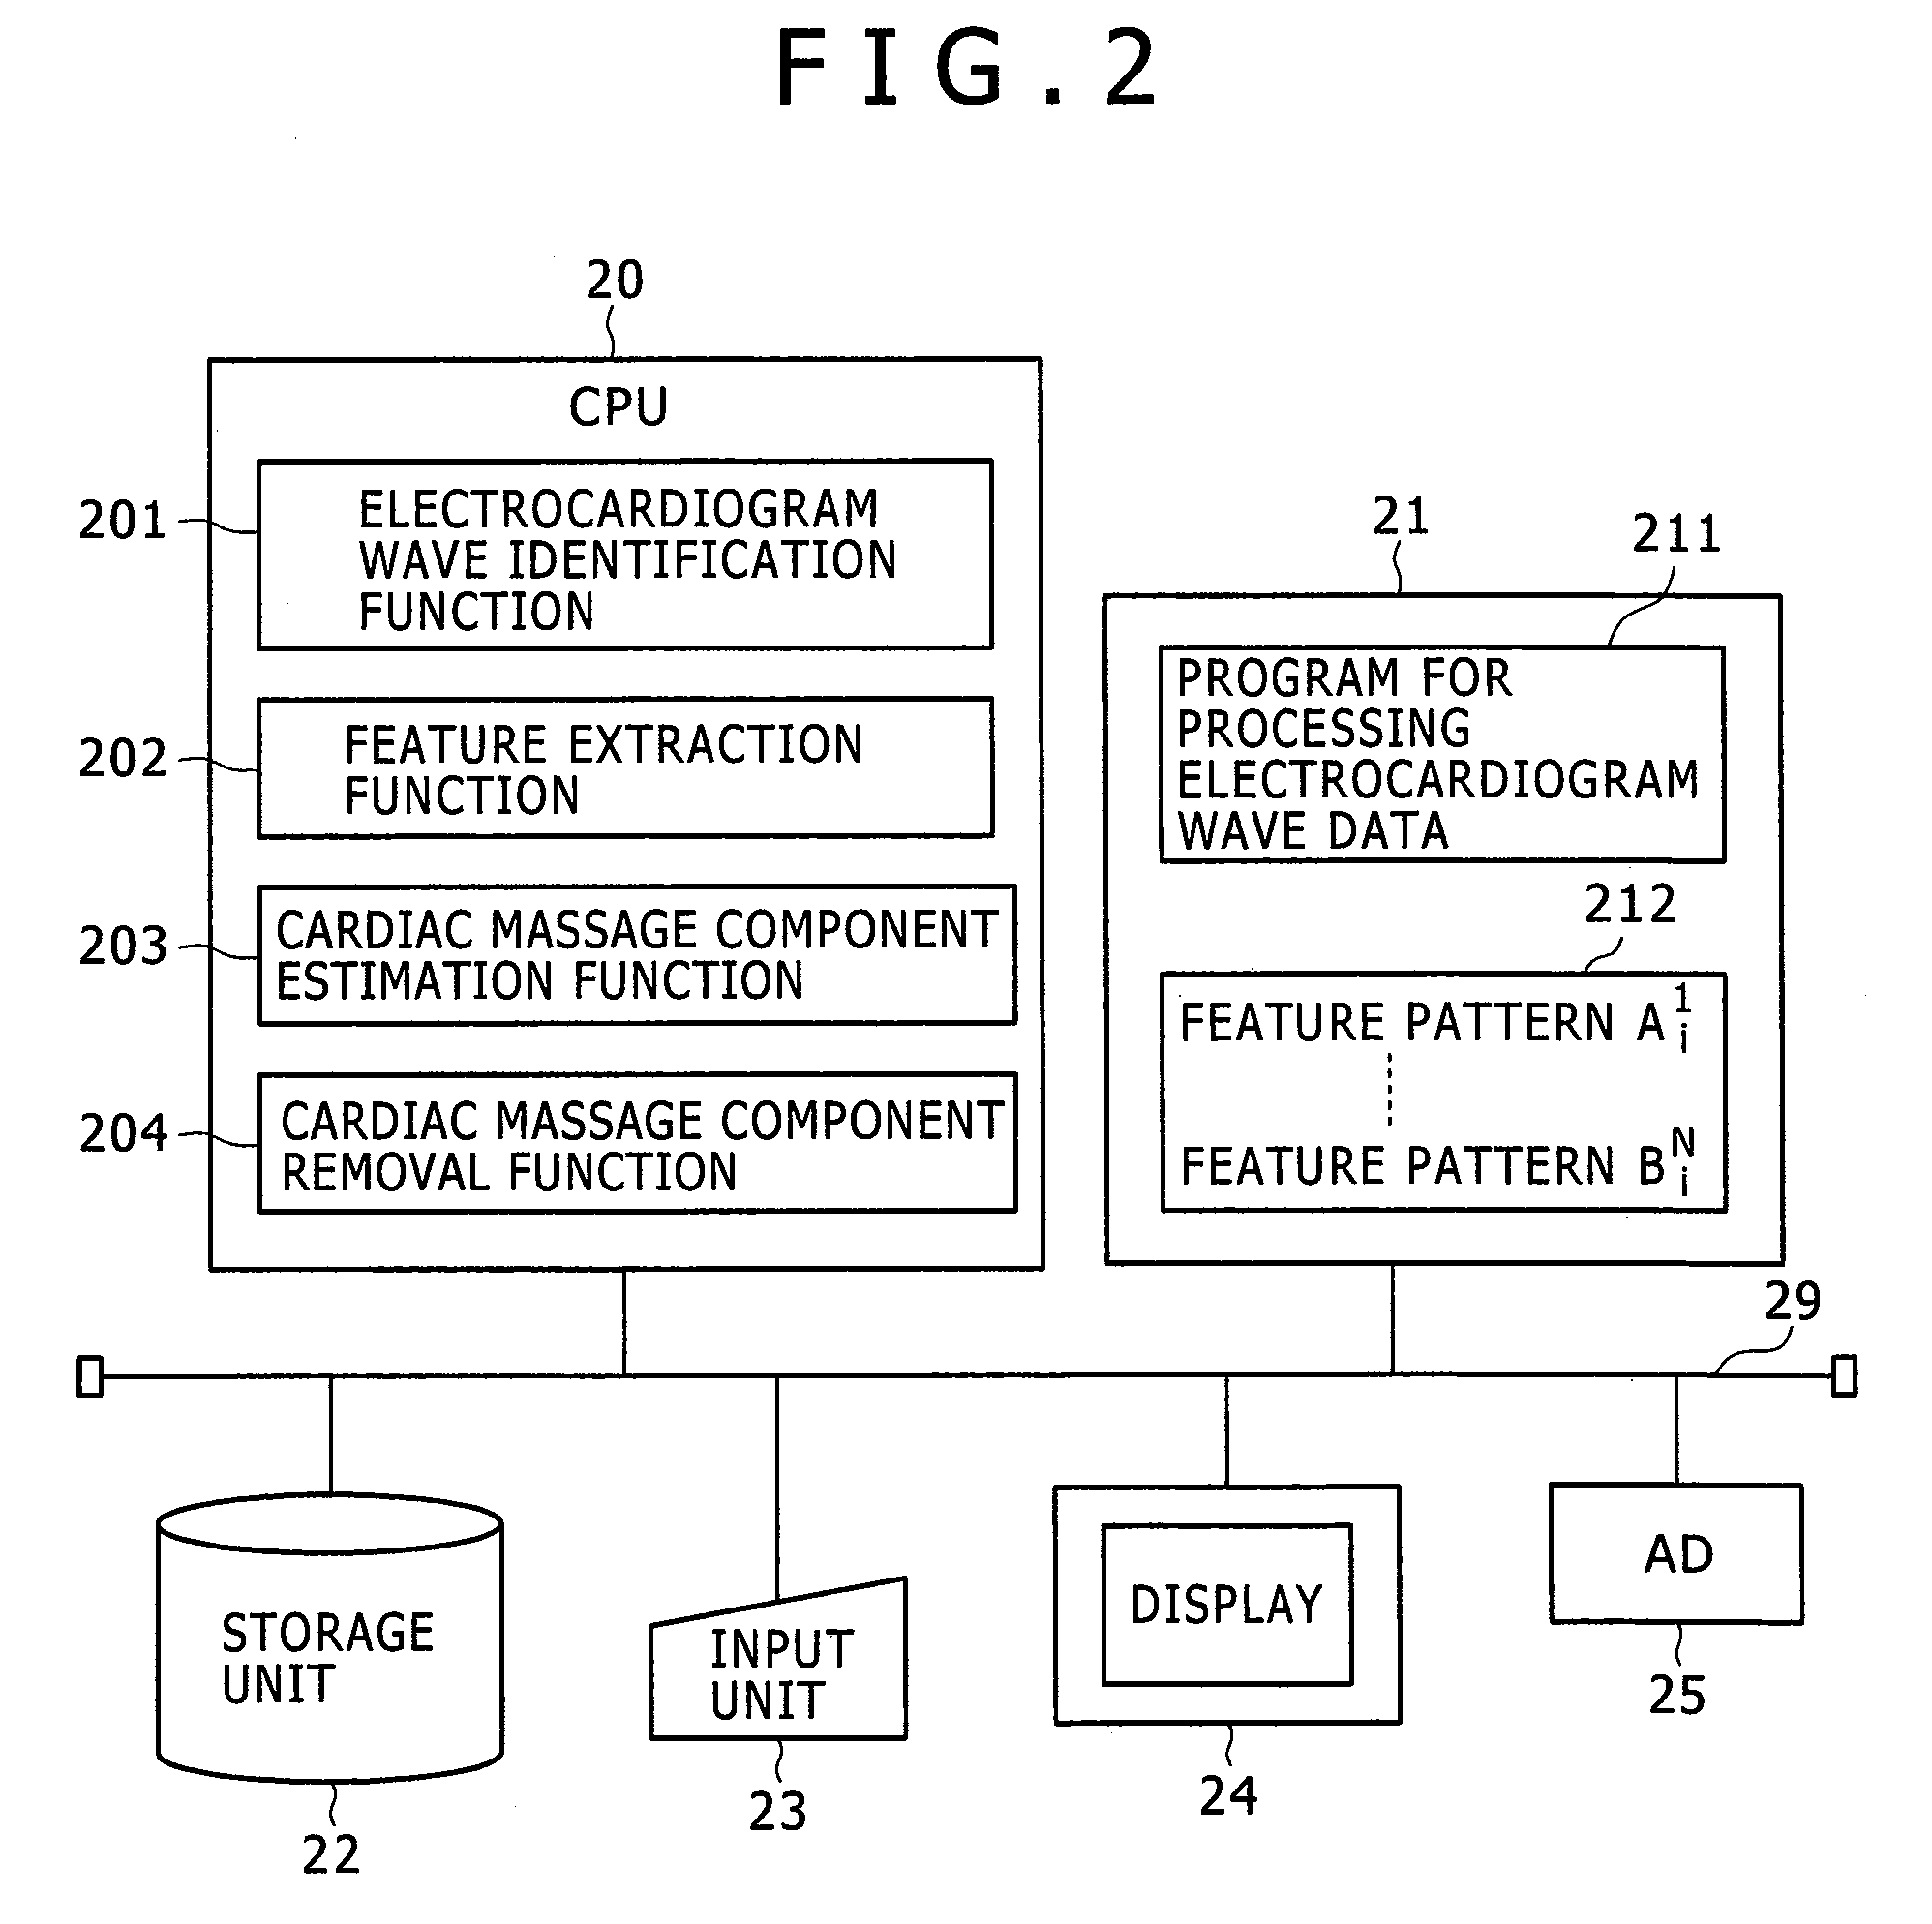 System and method for analyzing waves of electrocardiogram